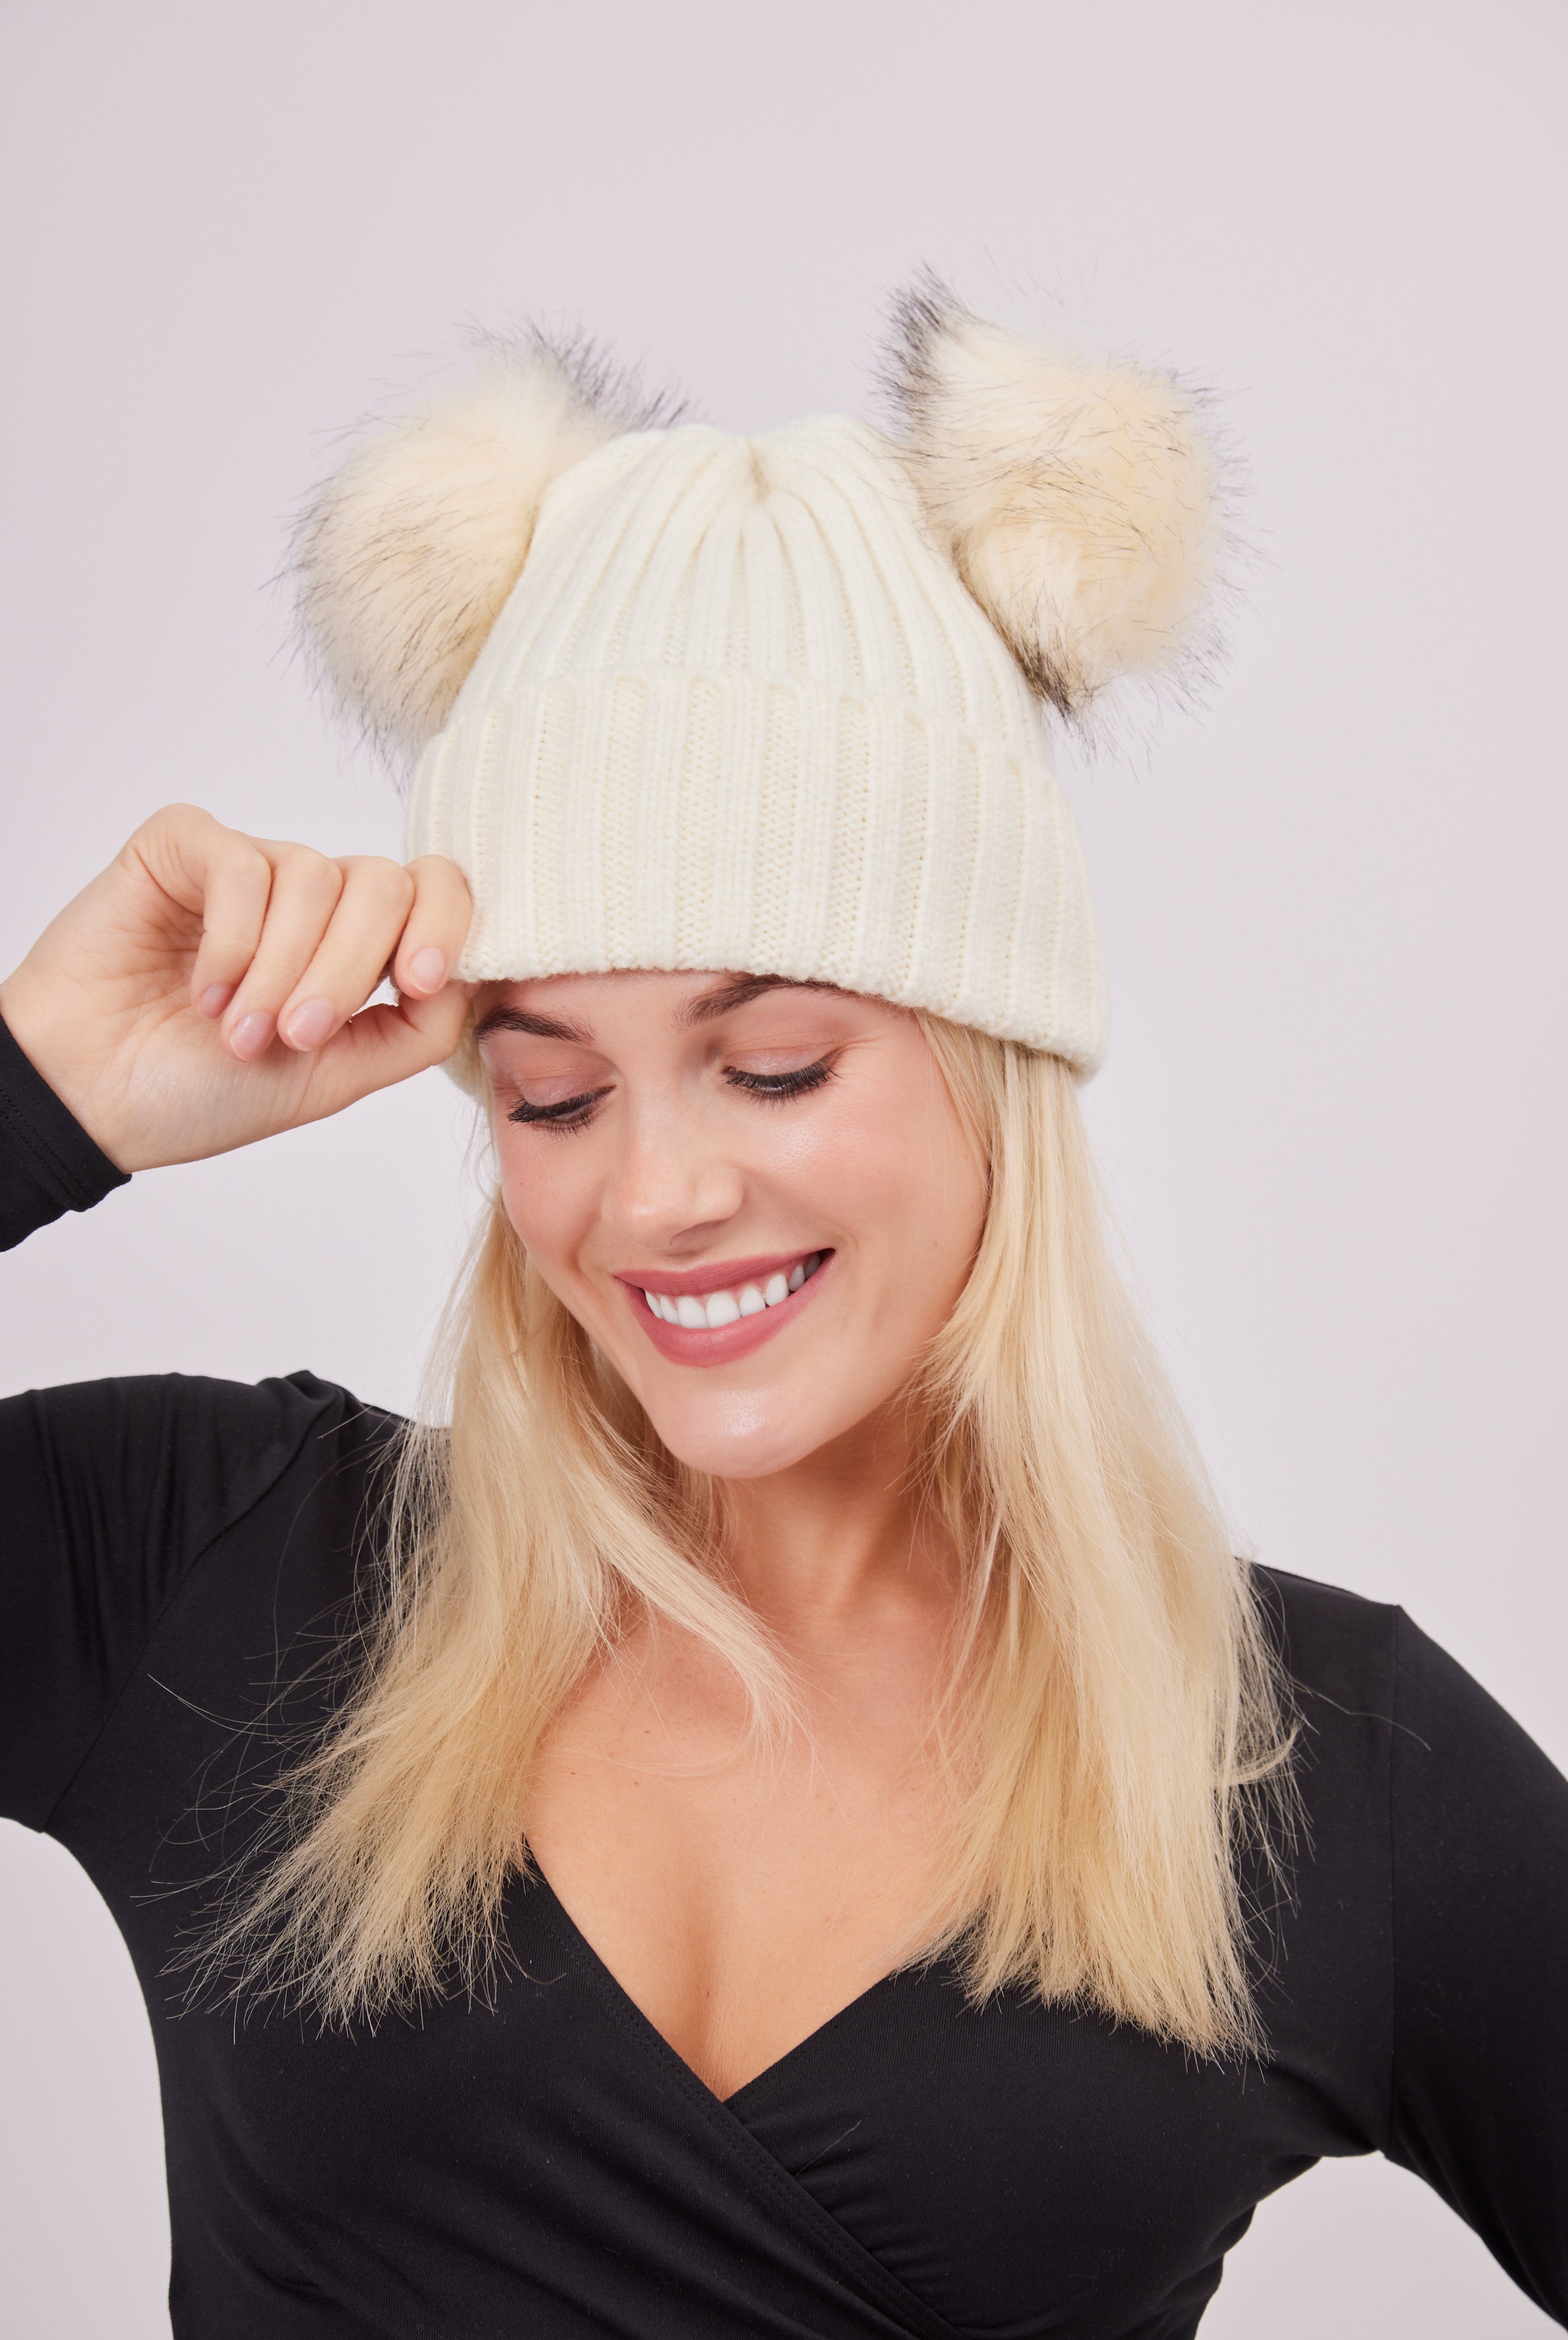 My Accessories London Knitted Double Fur Pom Beanie in White | Hat | Pom Pom | Women's Accessories | Autumn | Winter | Basics